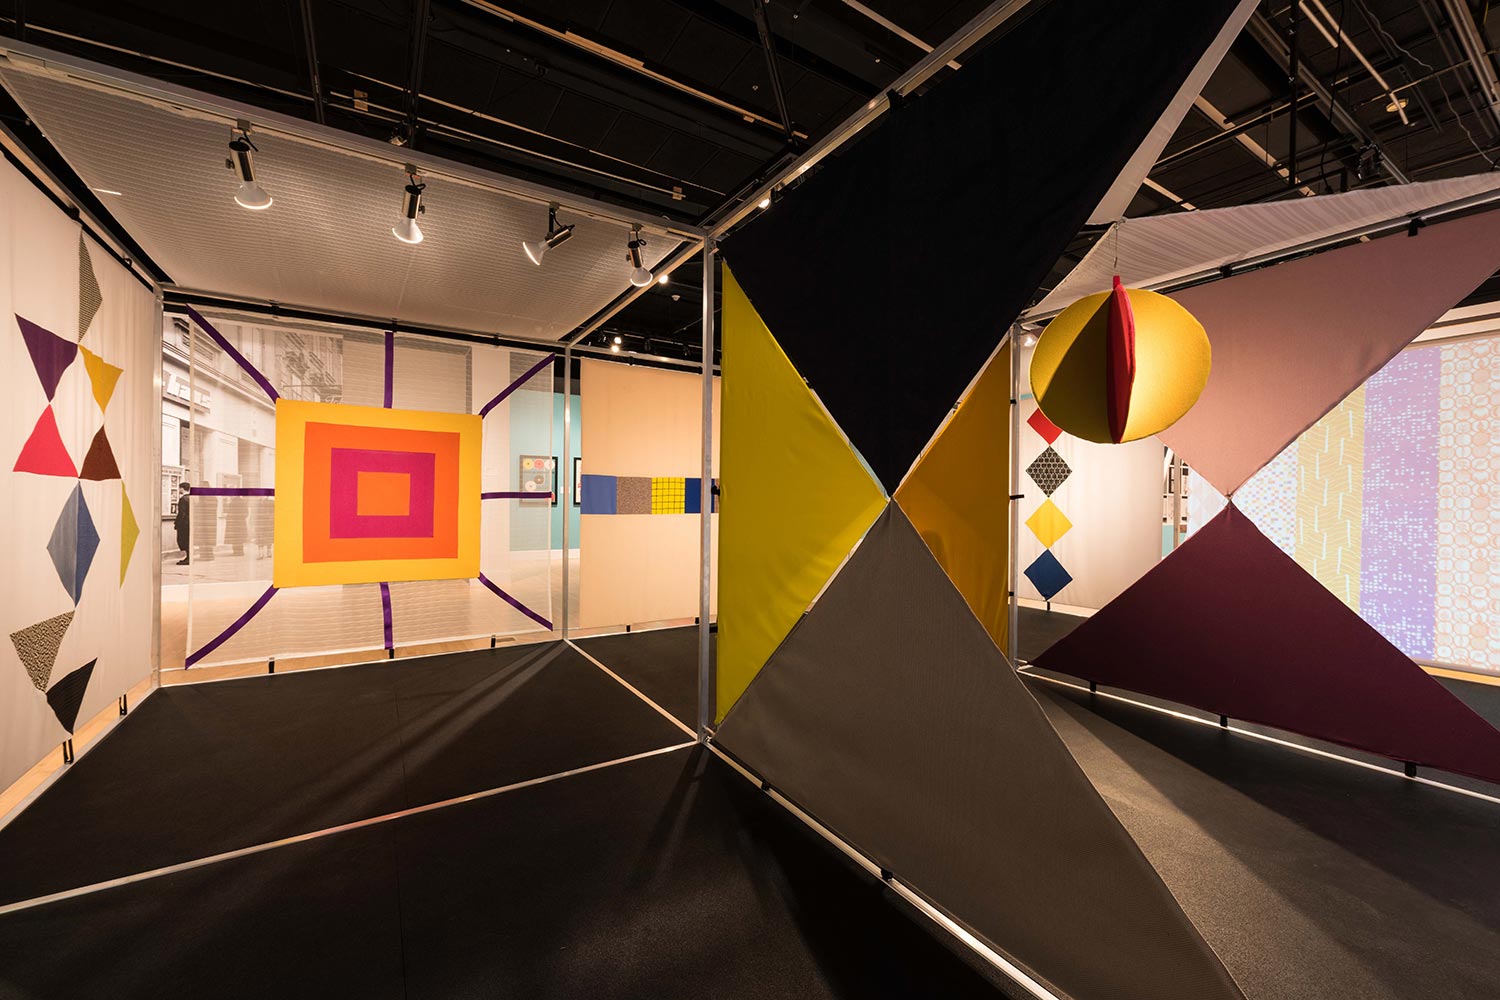 UMBC's Center for Art, Design and Visual Culture's 2018 installation of ‘A Designed Life,’ featuring The Knoll Pavilion’s “Textiles from the USA” Curated by Professor Peggy Re.